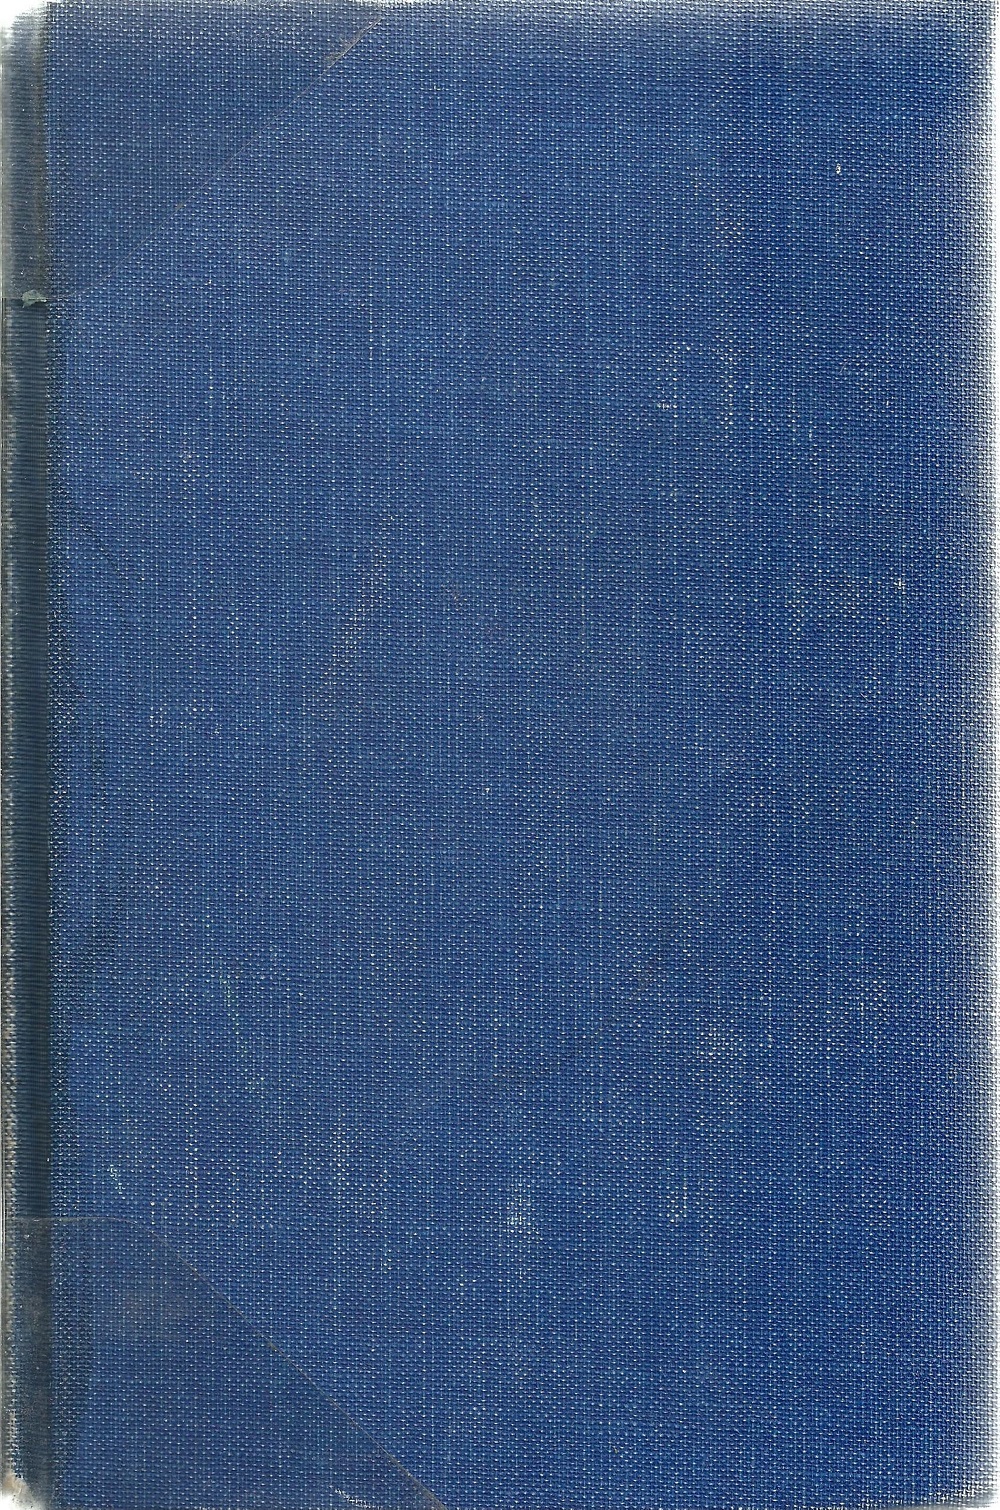 The Caine Mutiny A Novel of World War II by Herman Wouk Hardback Book published by Doubleday & Co